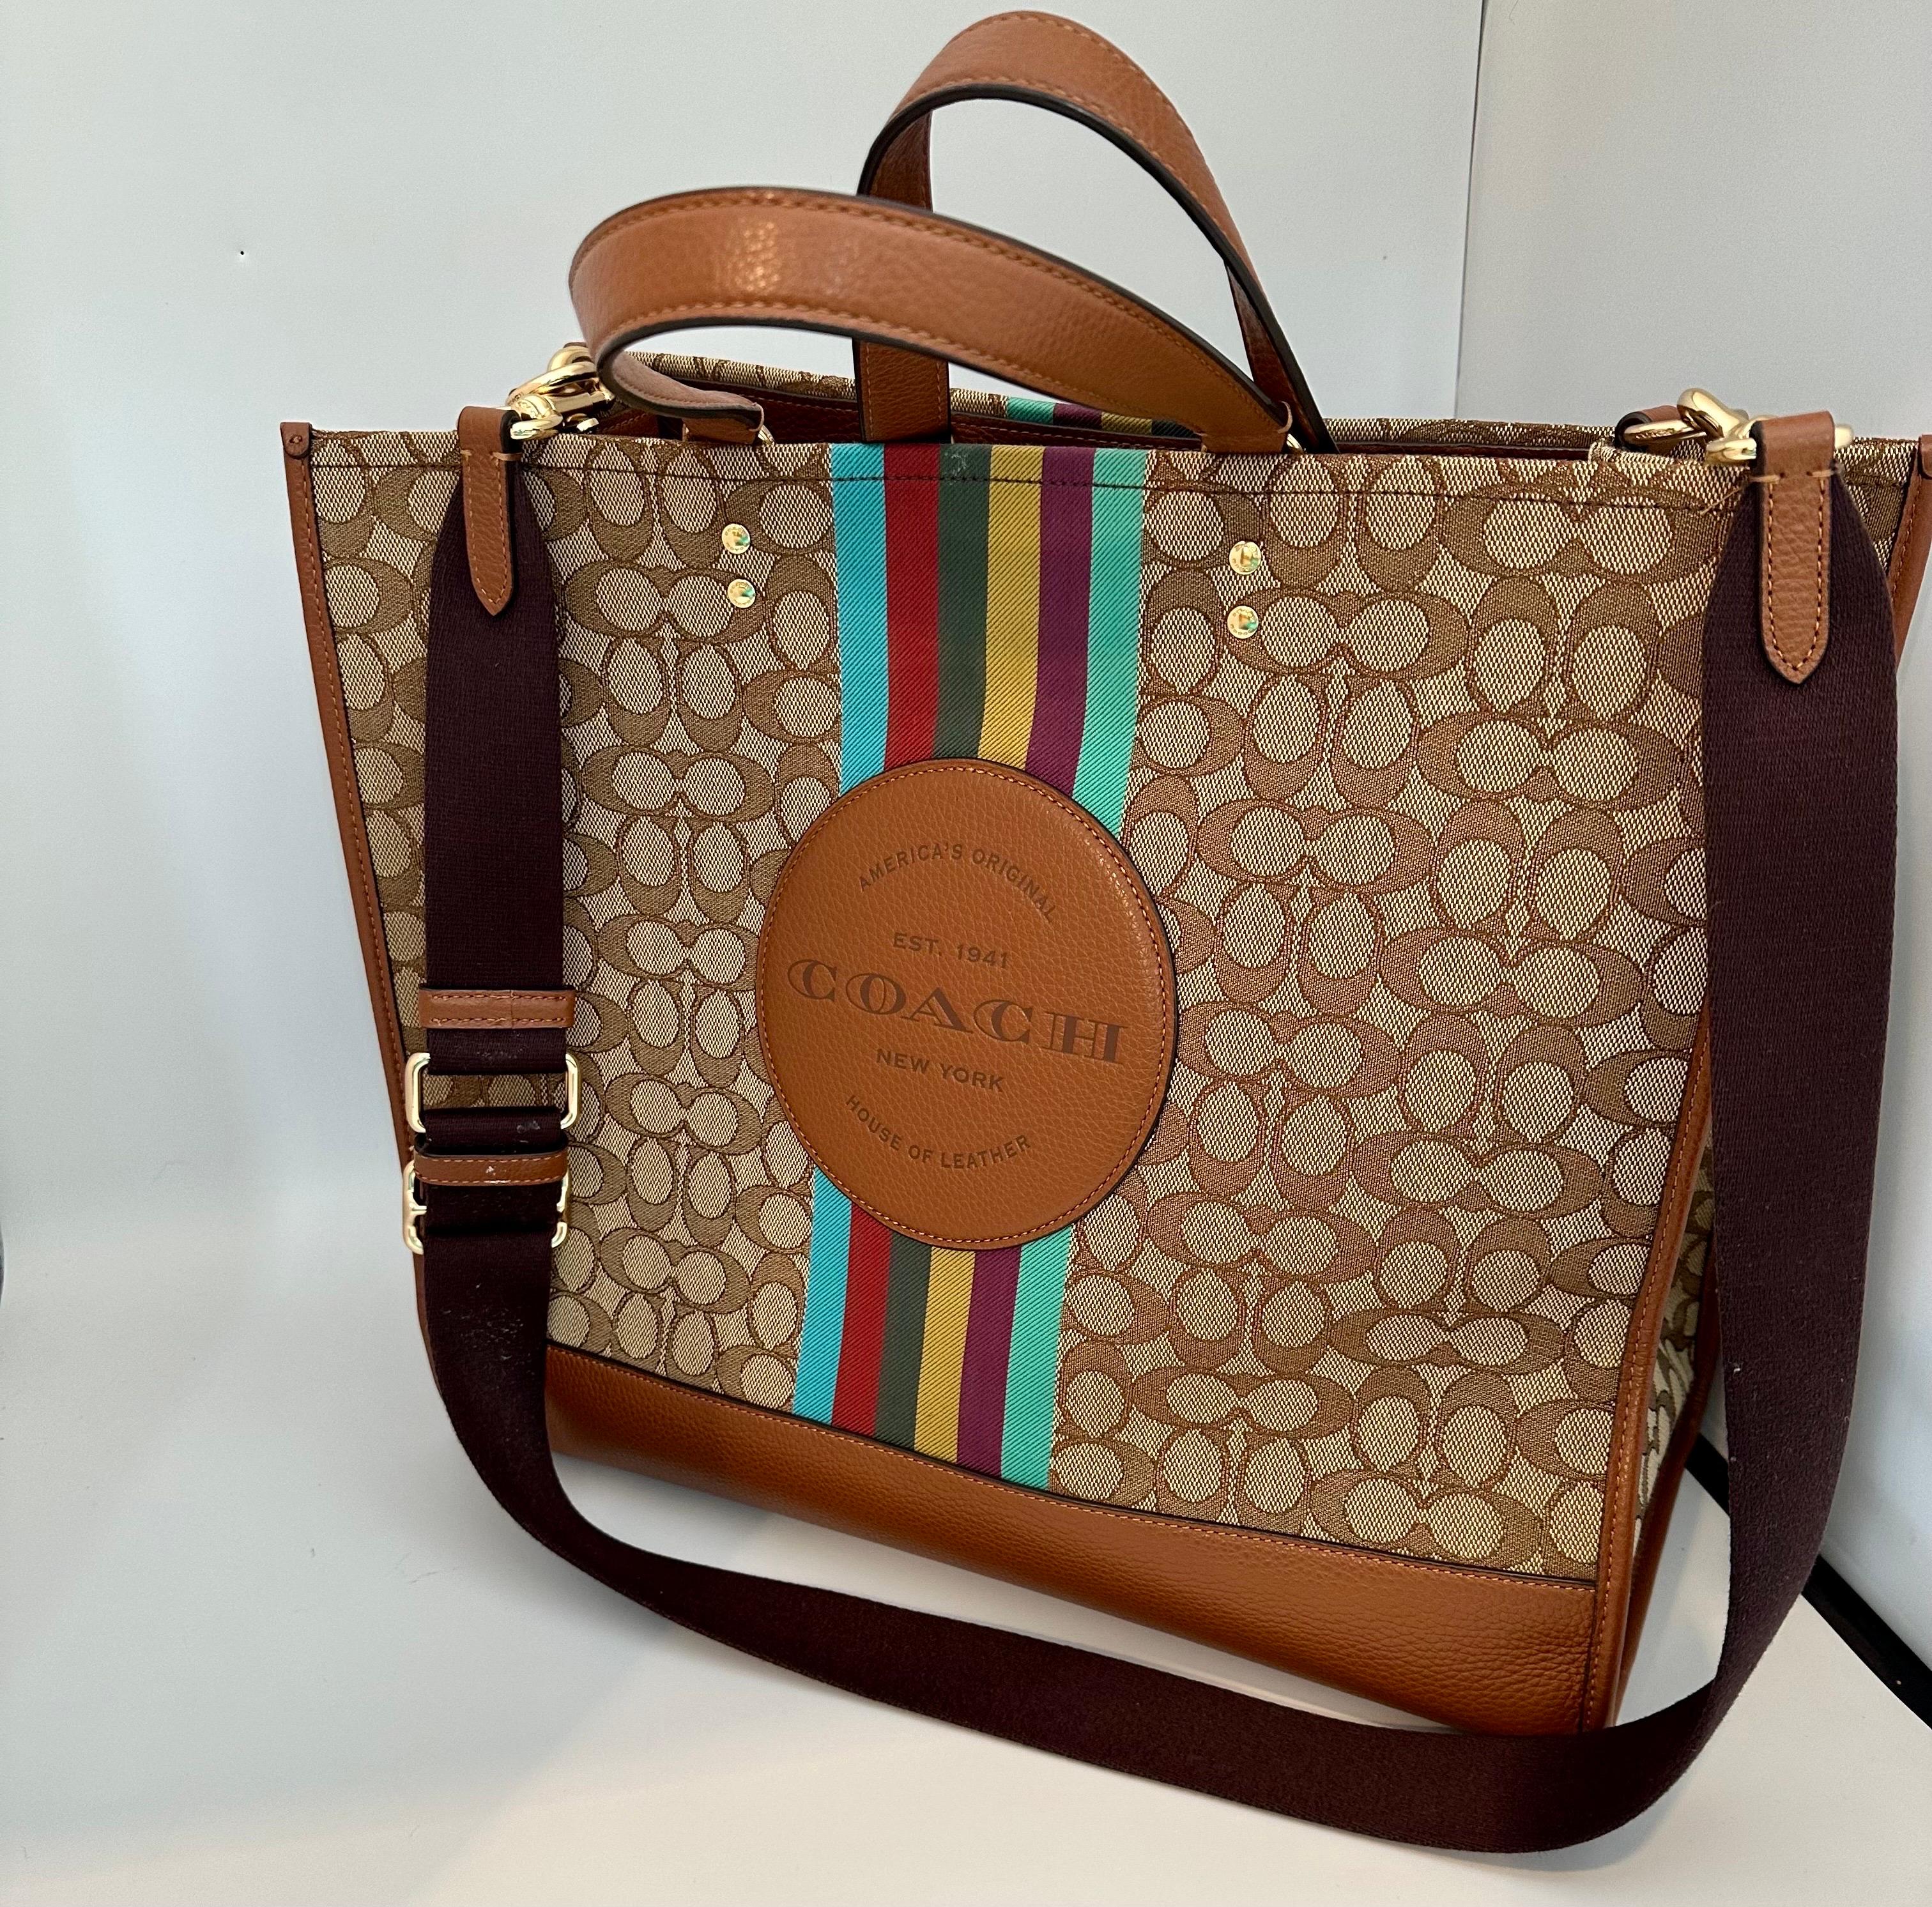 Dempsey Tote 40 In Signature Jacquard With Stripe And Coach Patch, Brand New  2